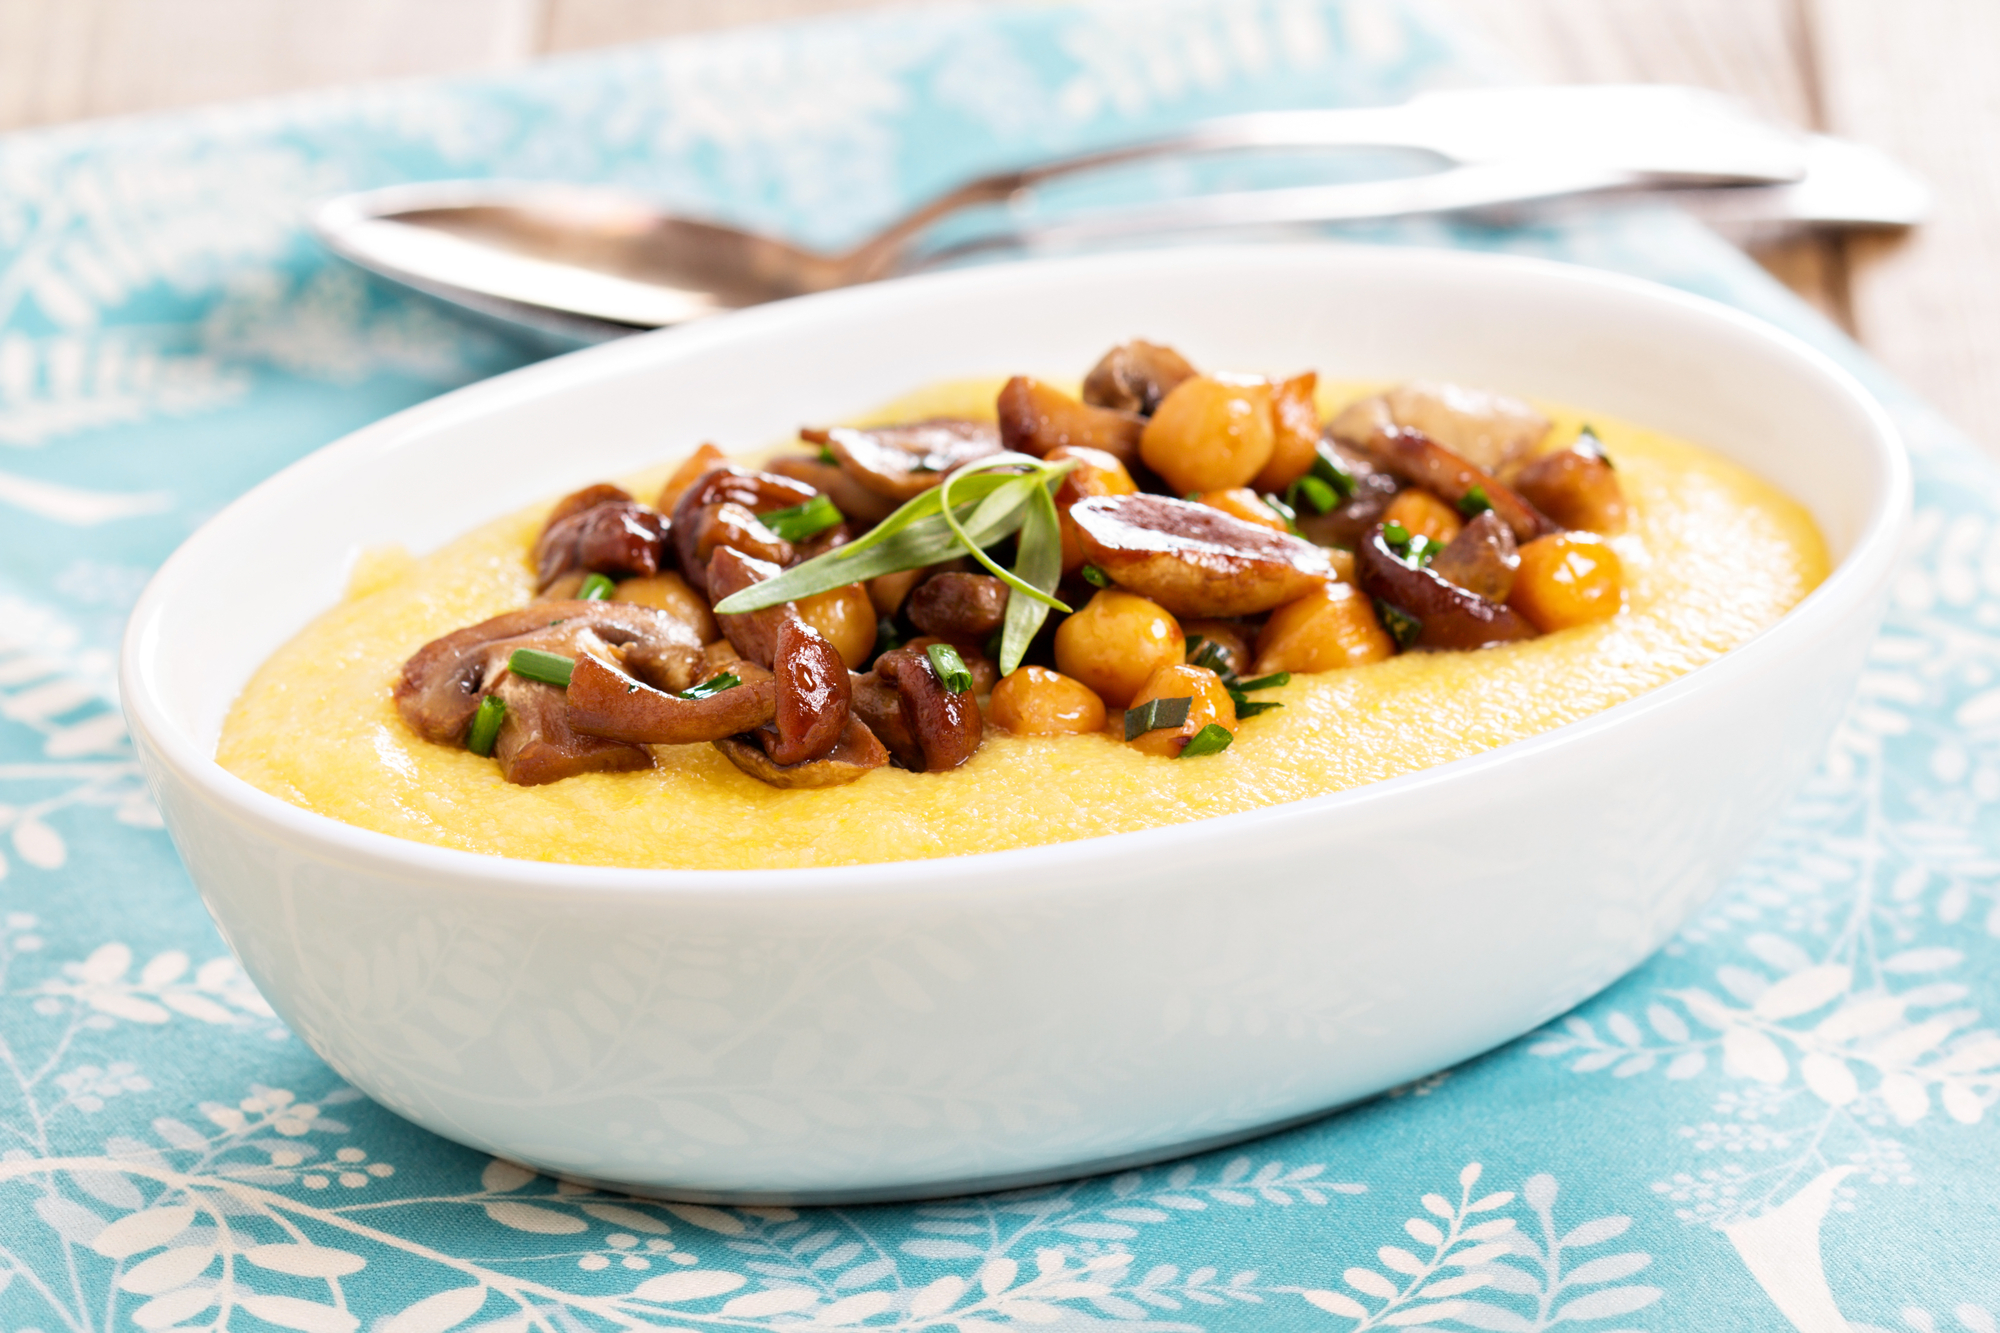 Polenta with Mushrooms and Garbanzo Beans